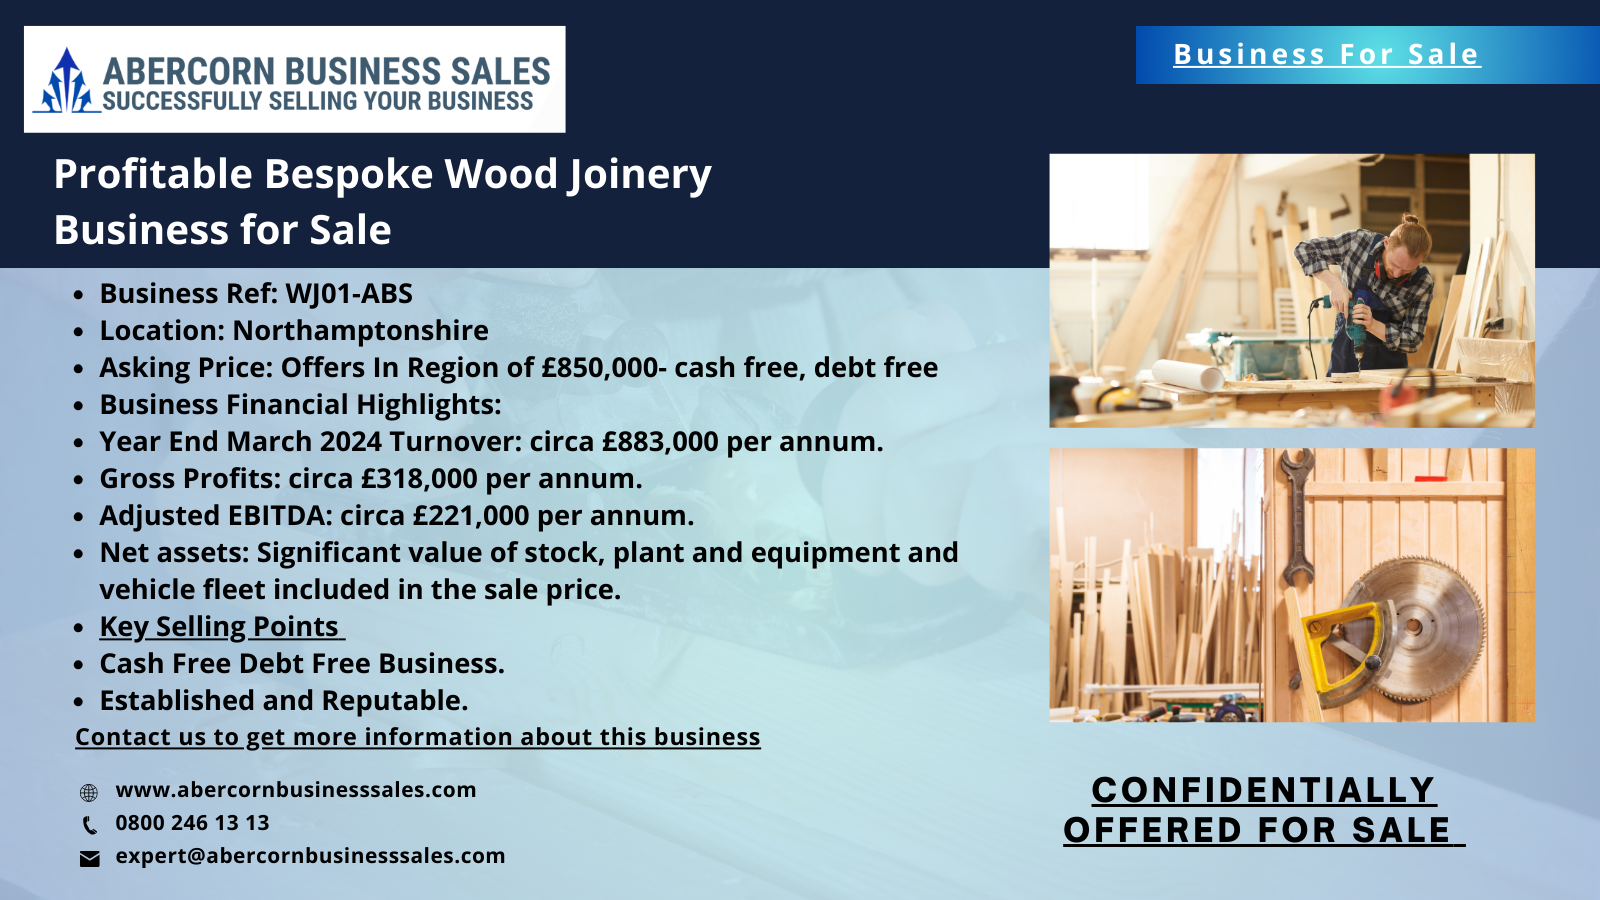 WJ01-ABS - Profitable Bespoke Wood Joinery Business for Sale